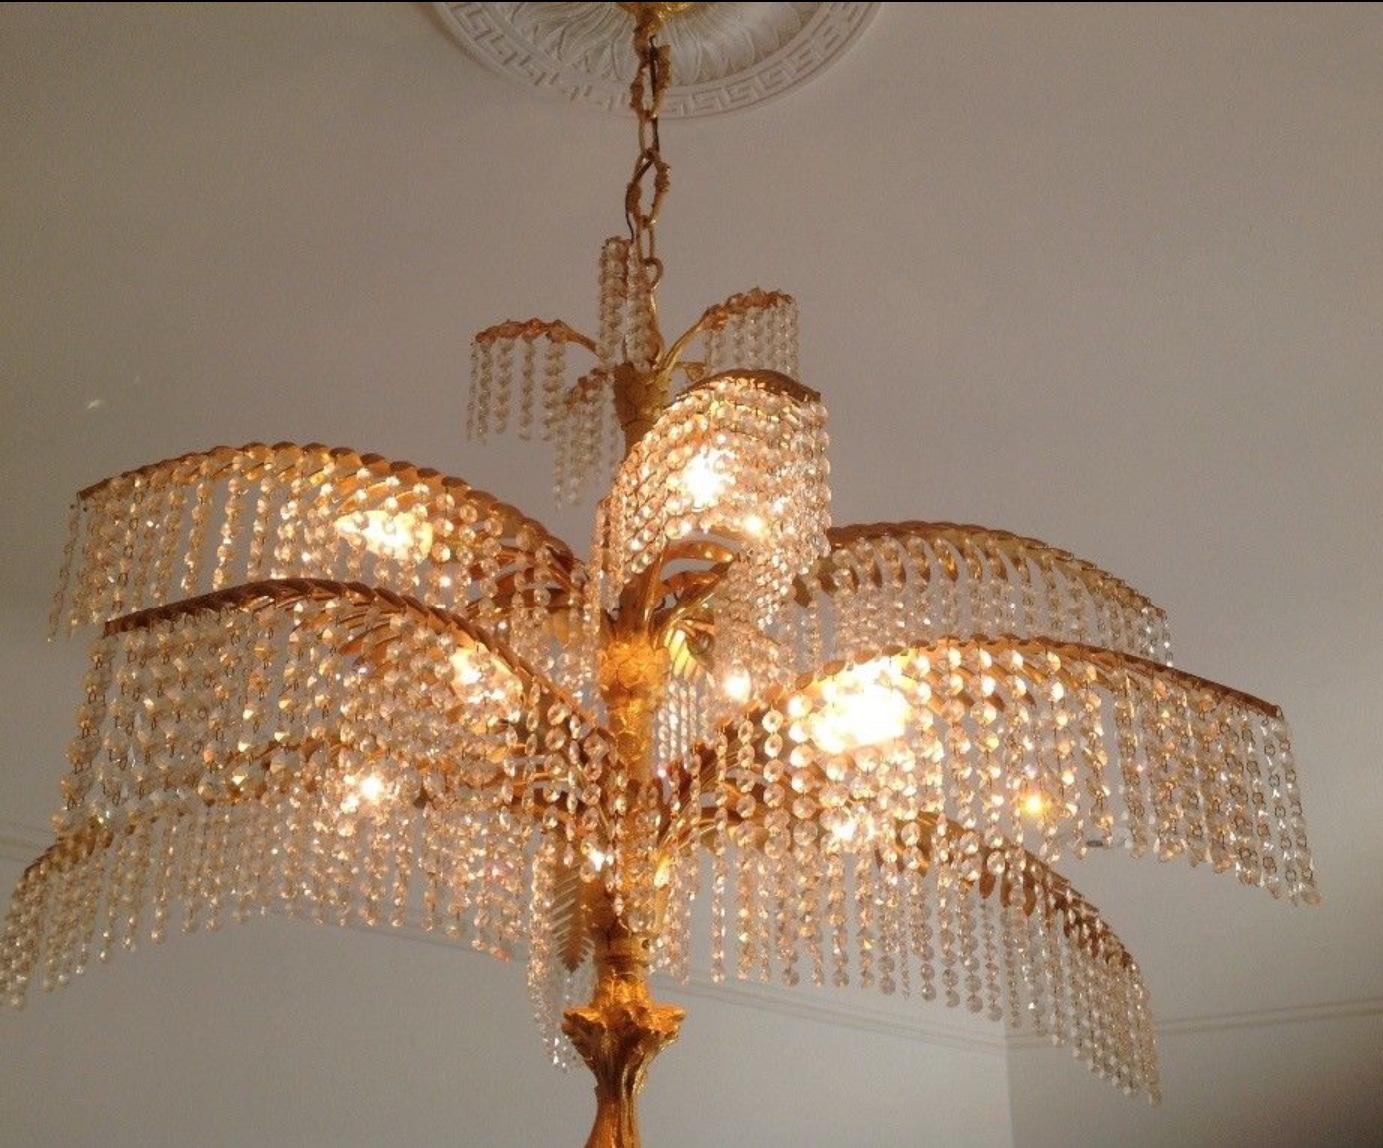 A large gilt bronze and crystal palm tree chandelier, prop. Bakalowits, circa 1970s.
Made of gilt solid bronze frame and cut crystal.
Socket: e14 (Edison) for standard screw bulbs.
Excellent condition.
(Pair available).